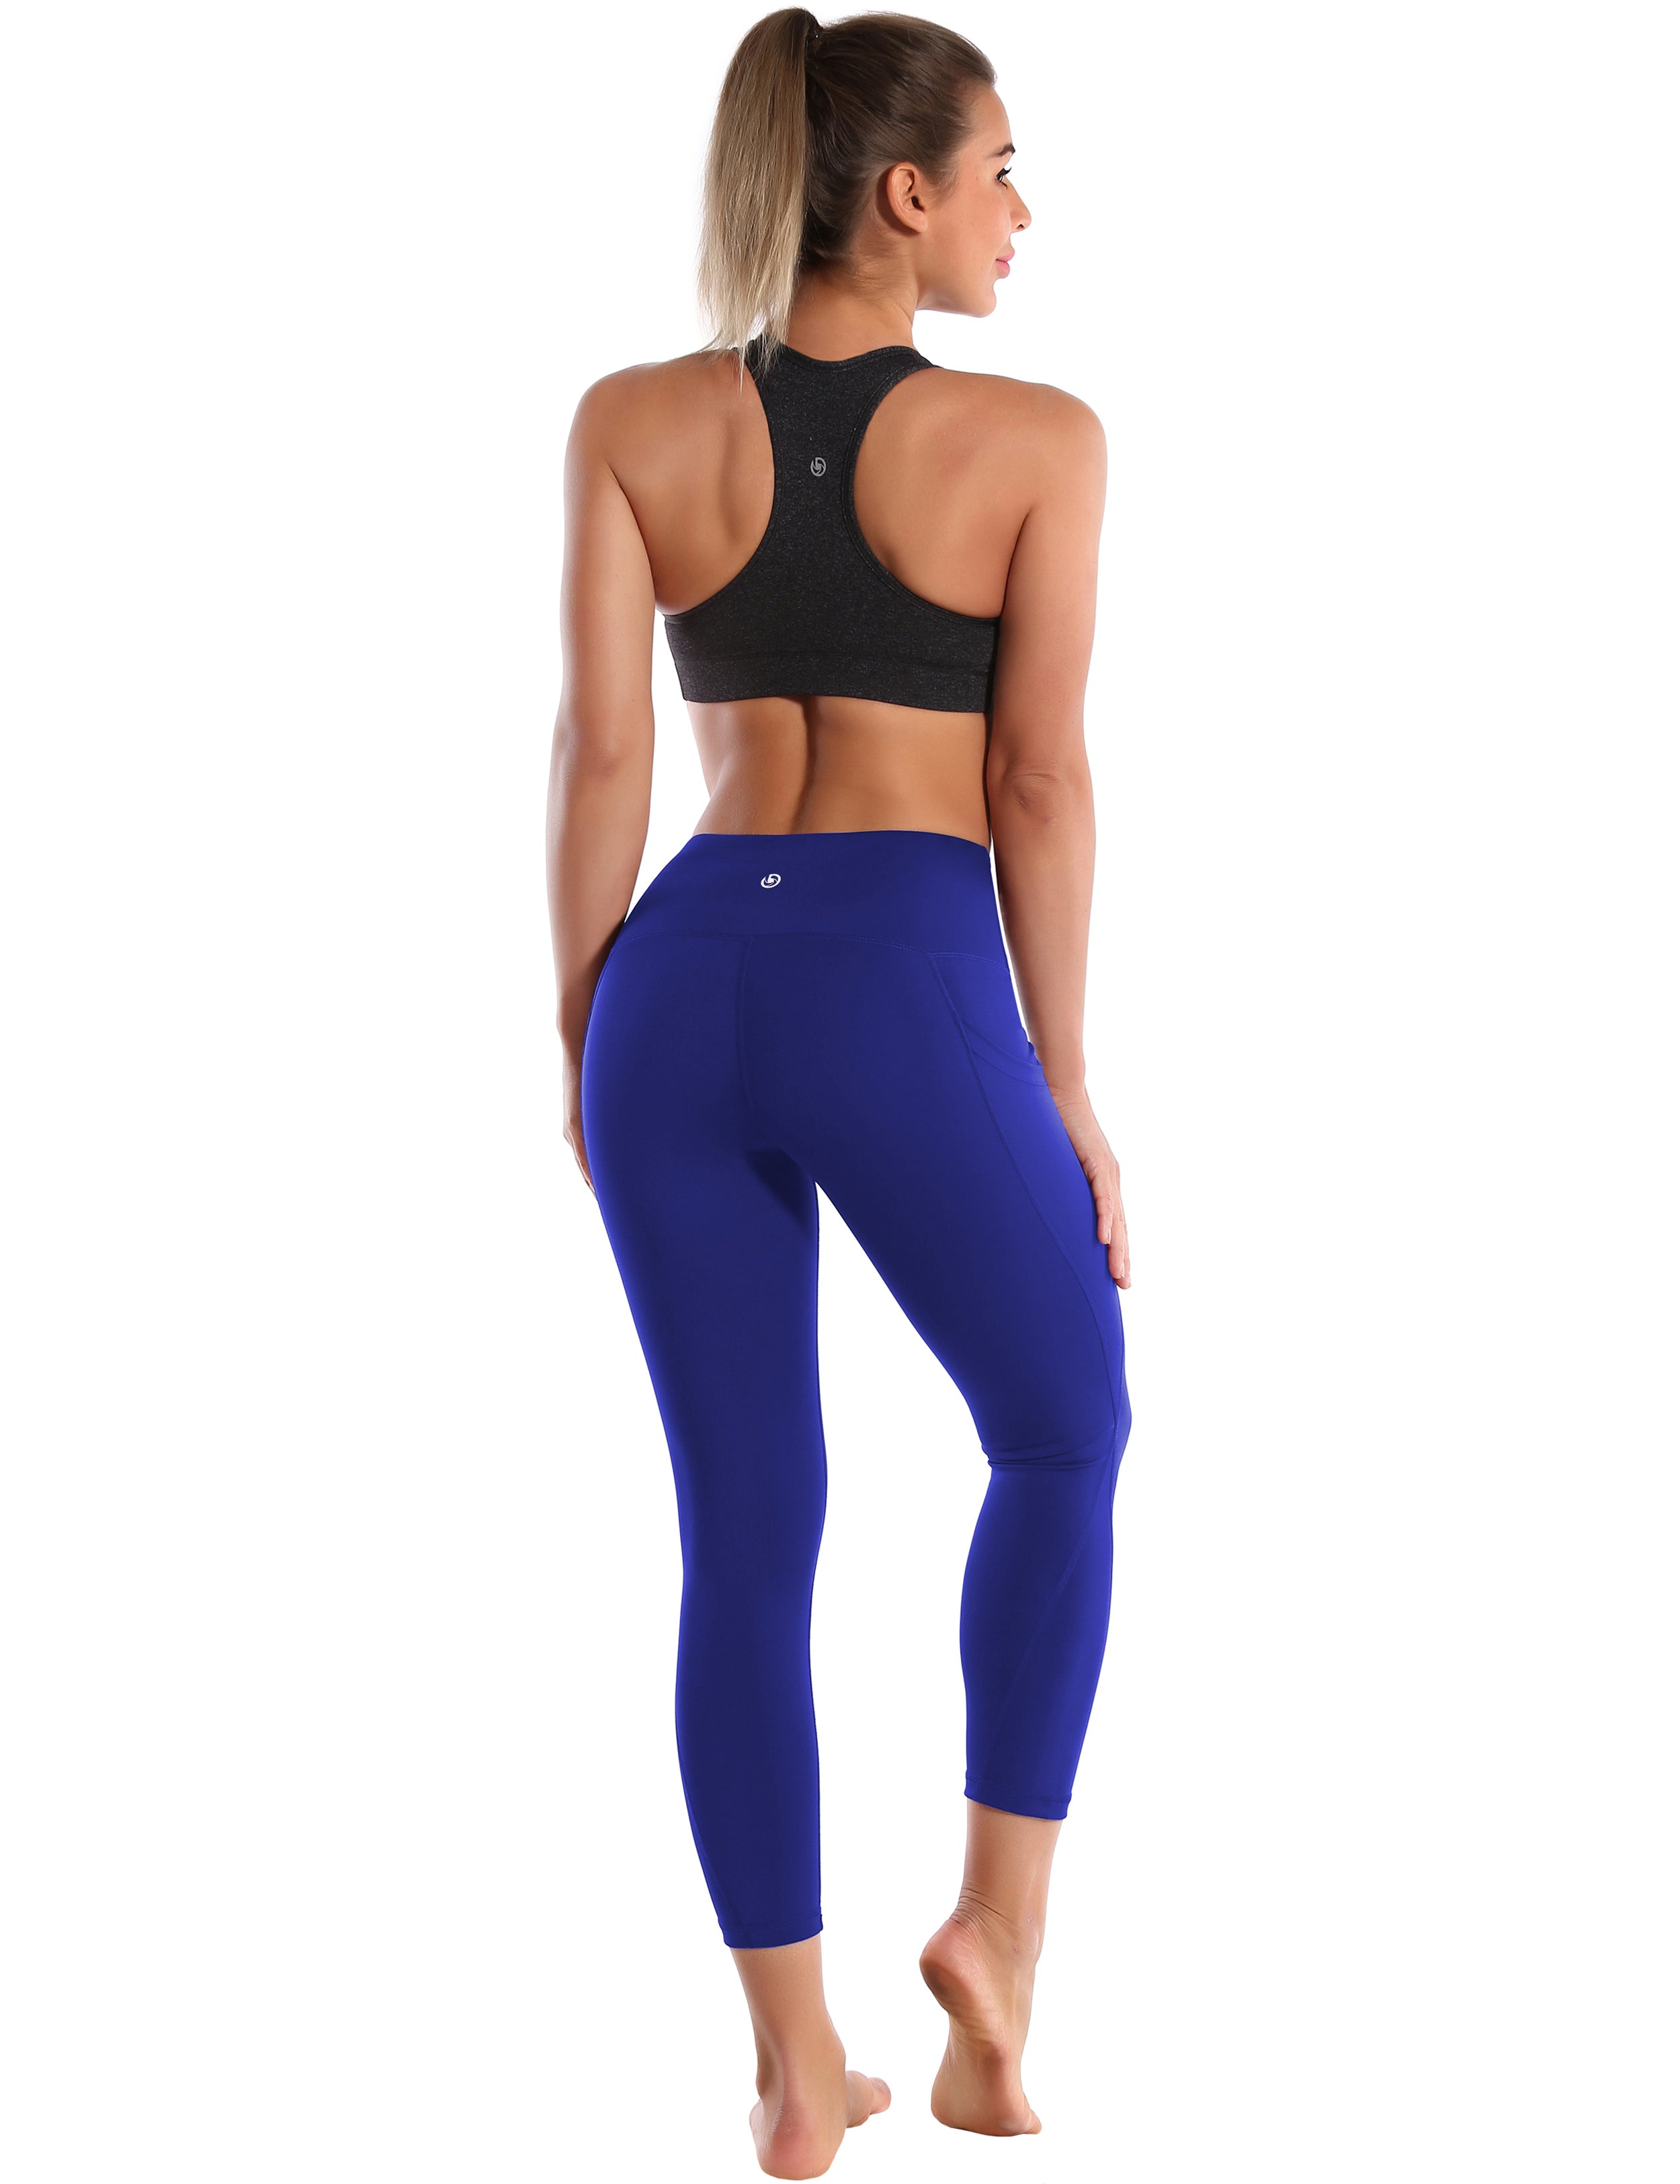 22" High Waist Side Pockets Capris navy 75%Nylon/25%Spandex Fabric doesn't attract lint easily 4-way stretch No see-through Moisture-wicking Tummy control Inner pocket